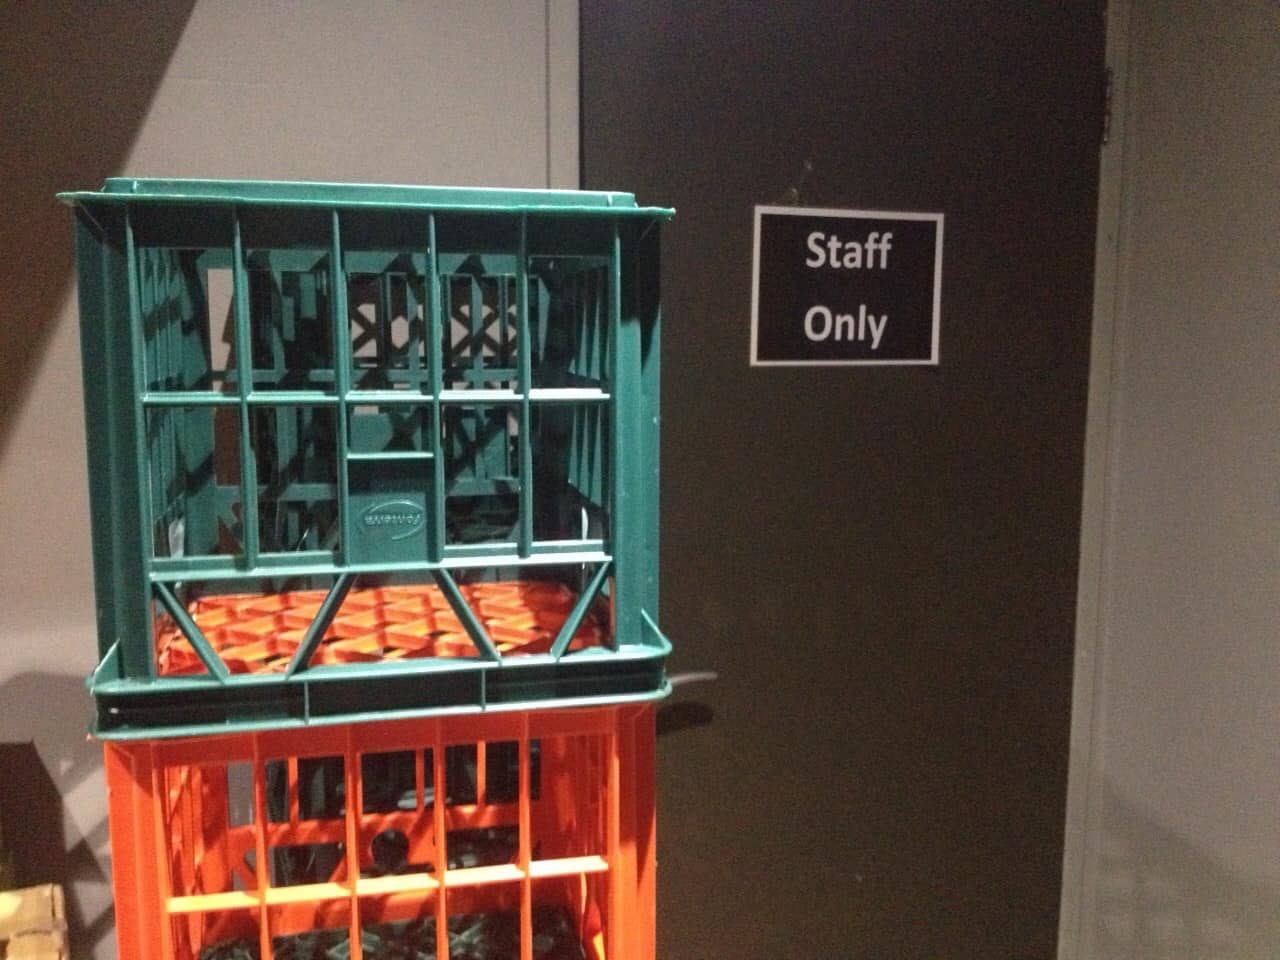 Staff only.